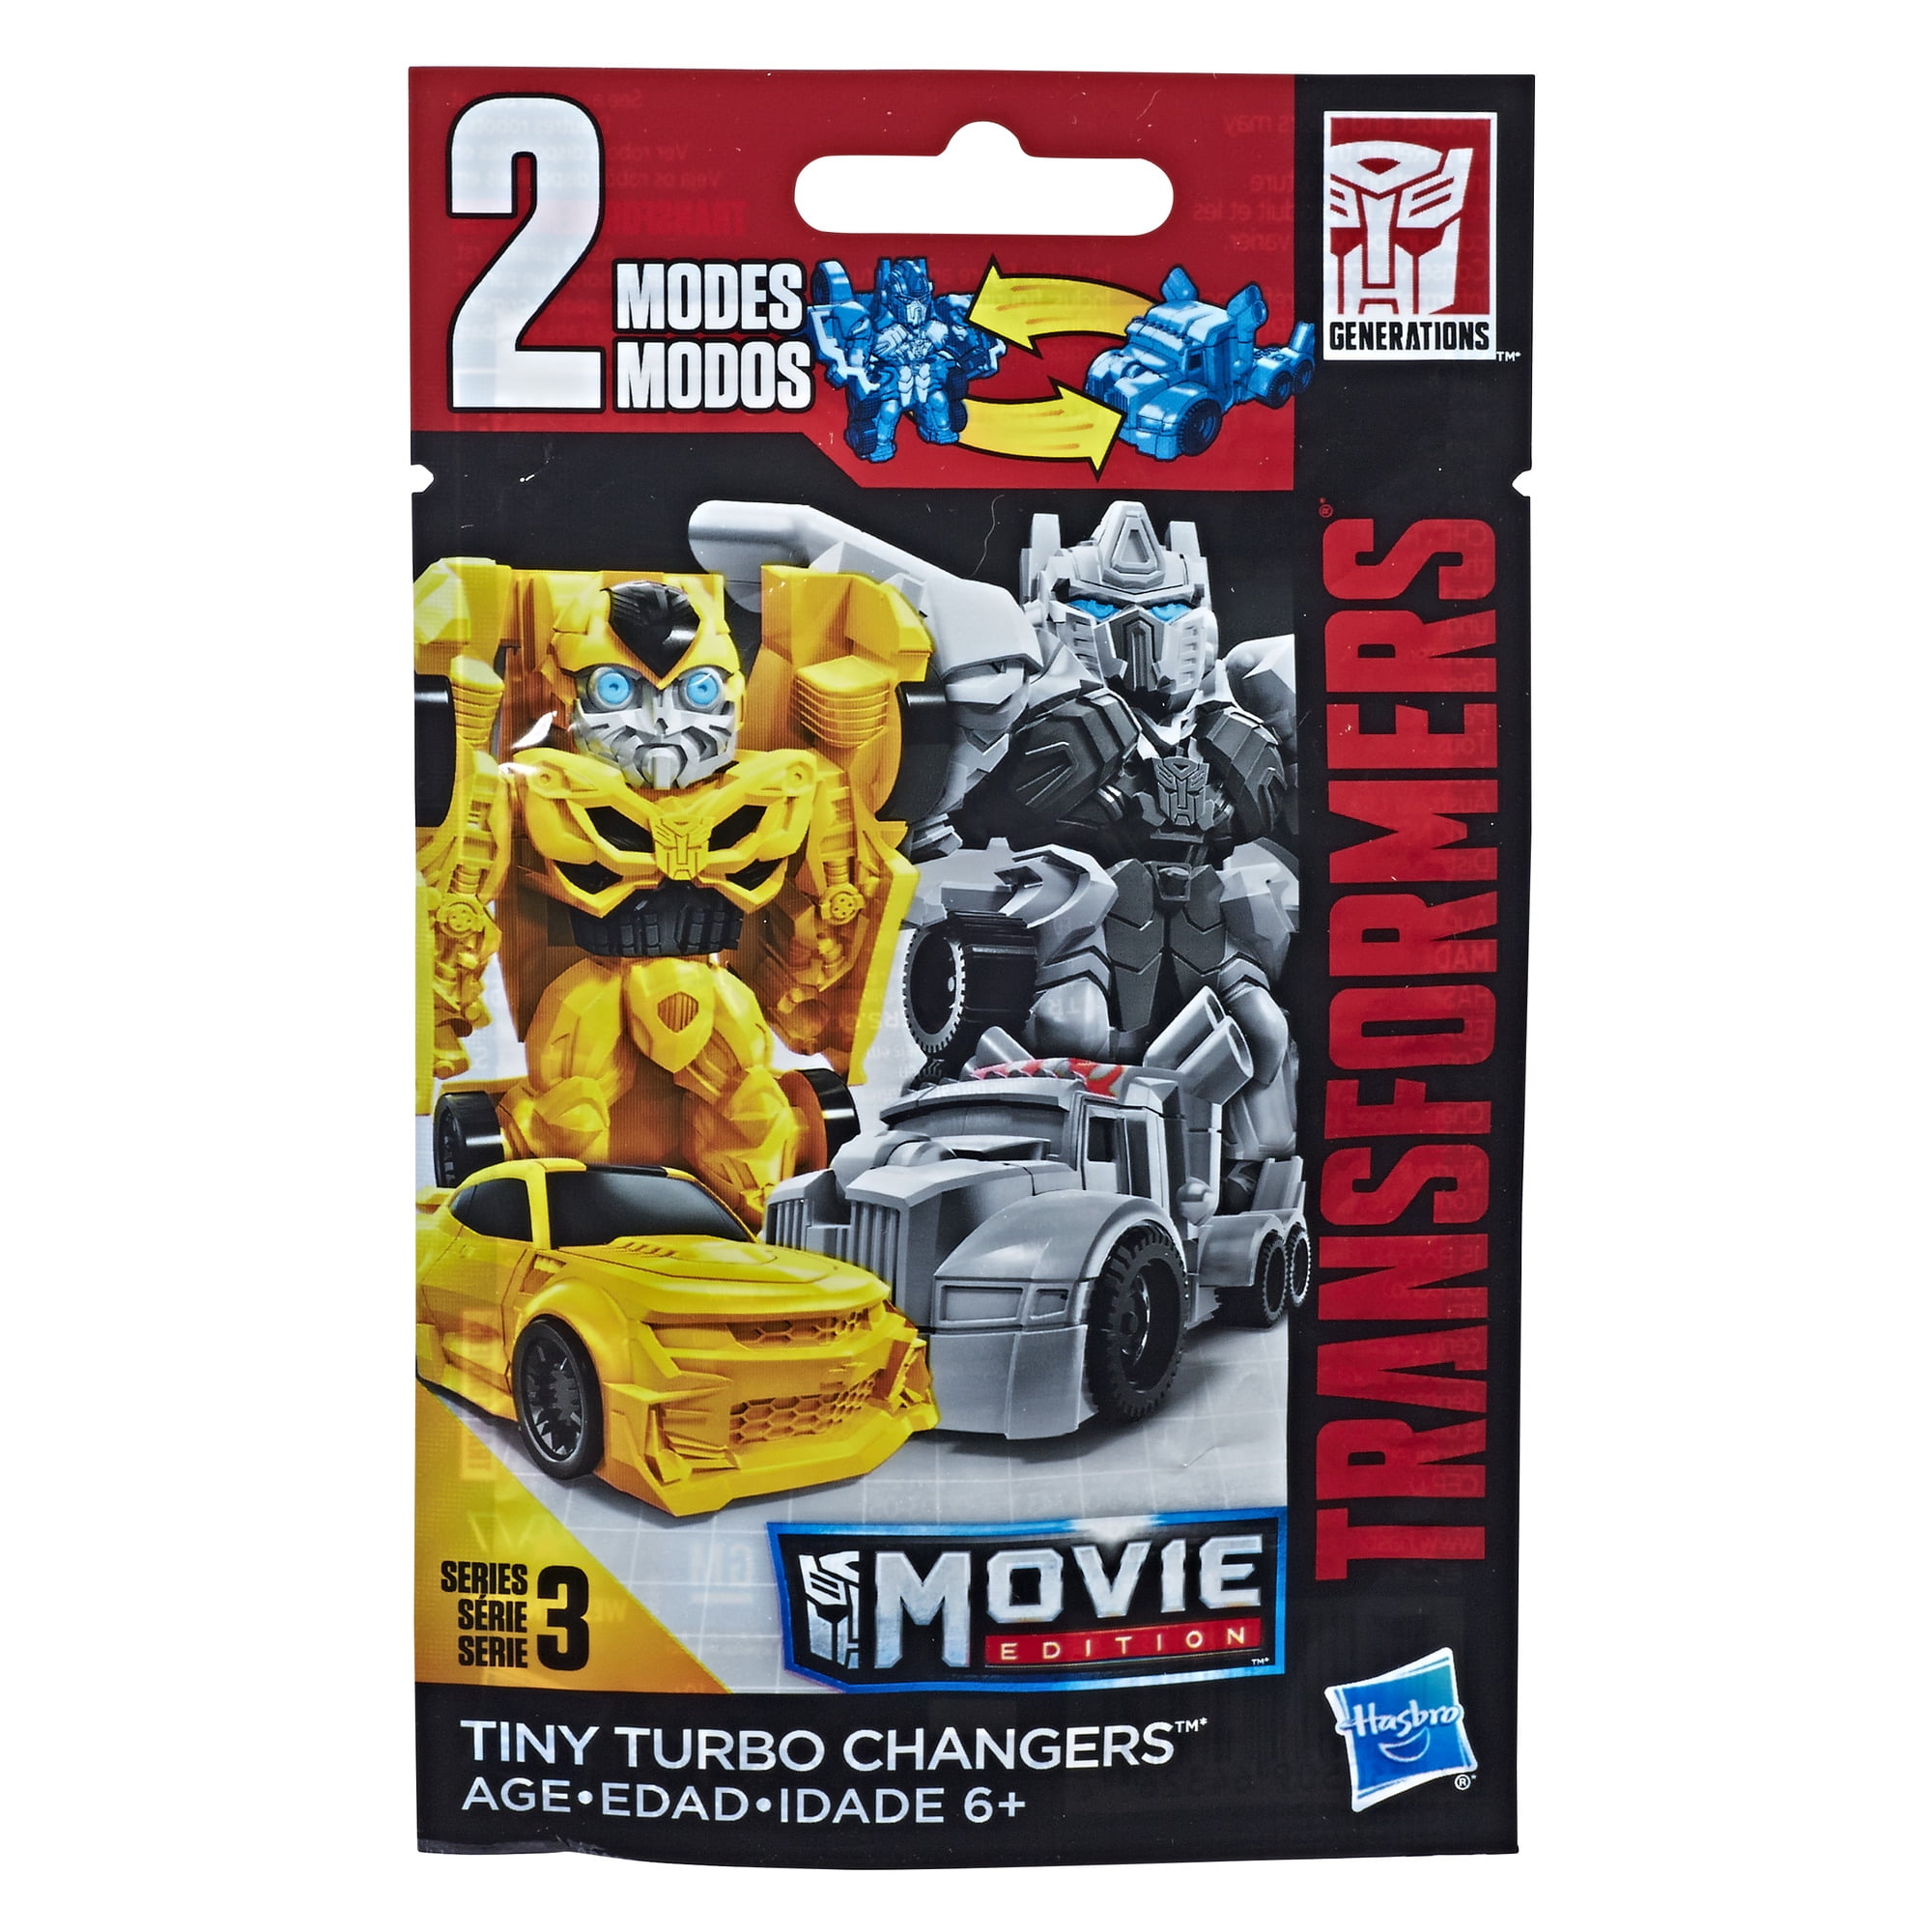 New Transformers RATCHET Truck Robot Tiny Turbo Changers Movie Figure Series 4 